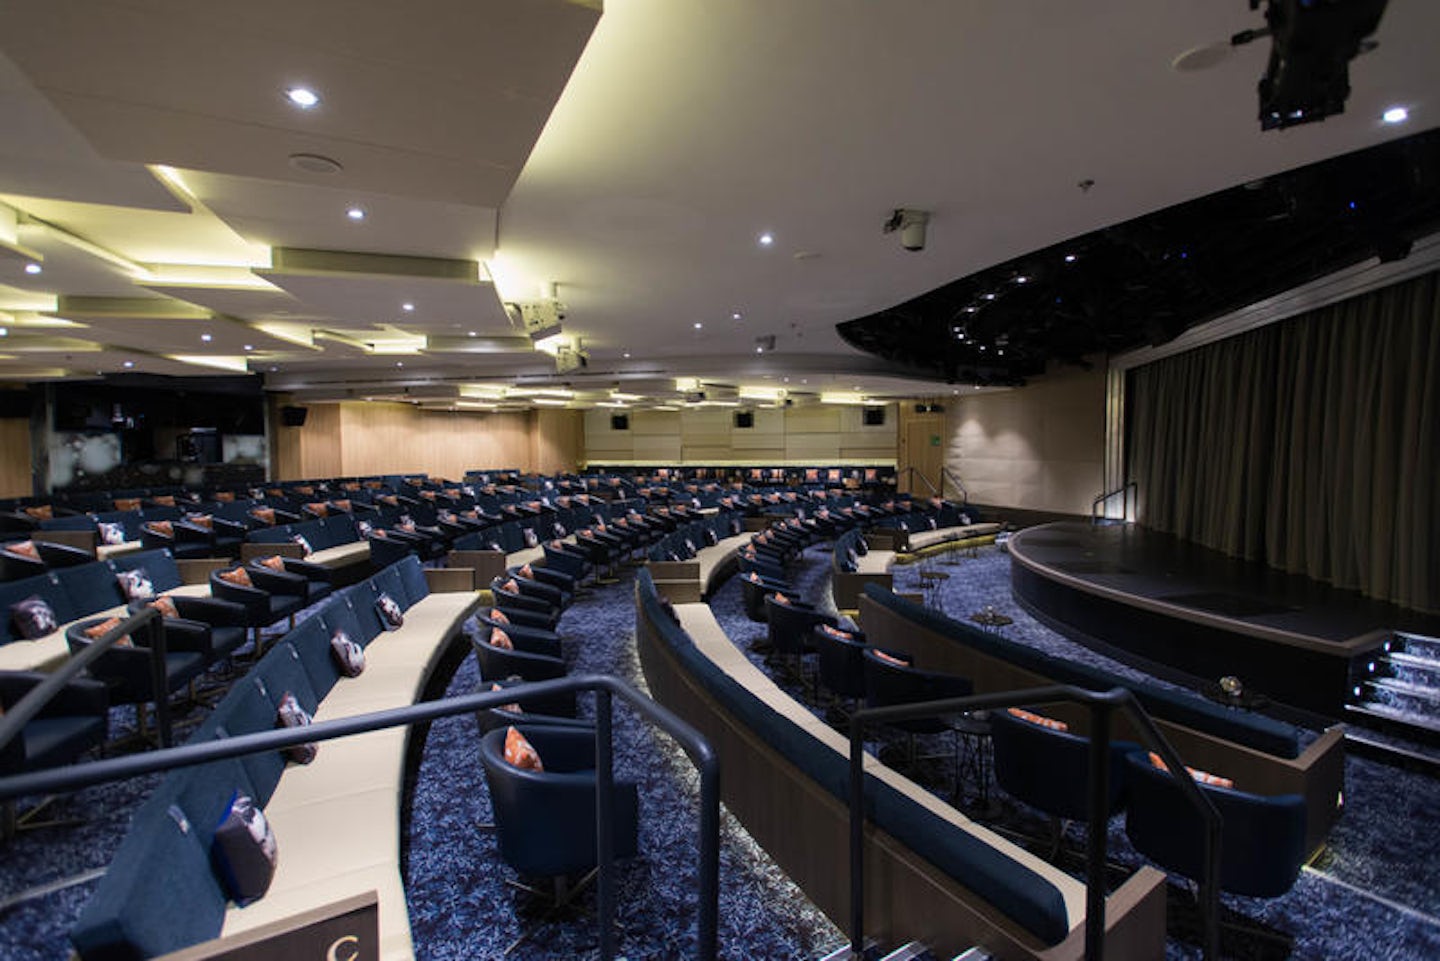 The Star Theater on Viking Star